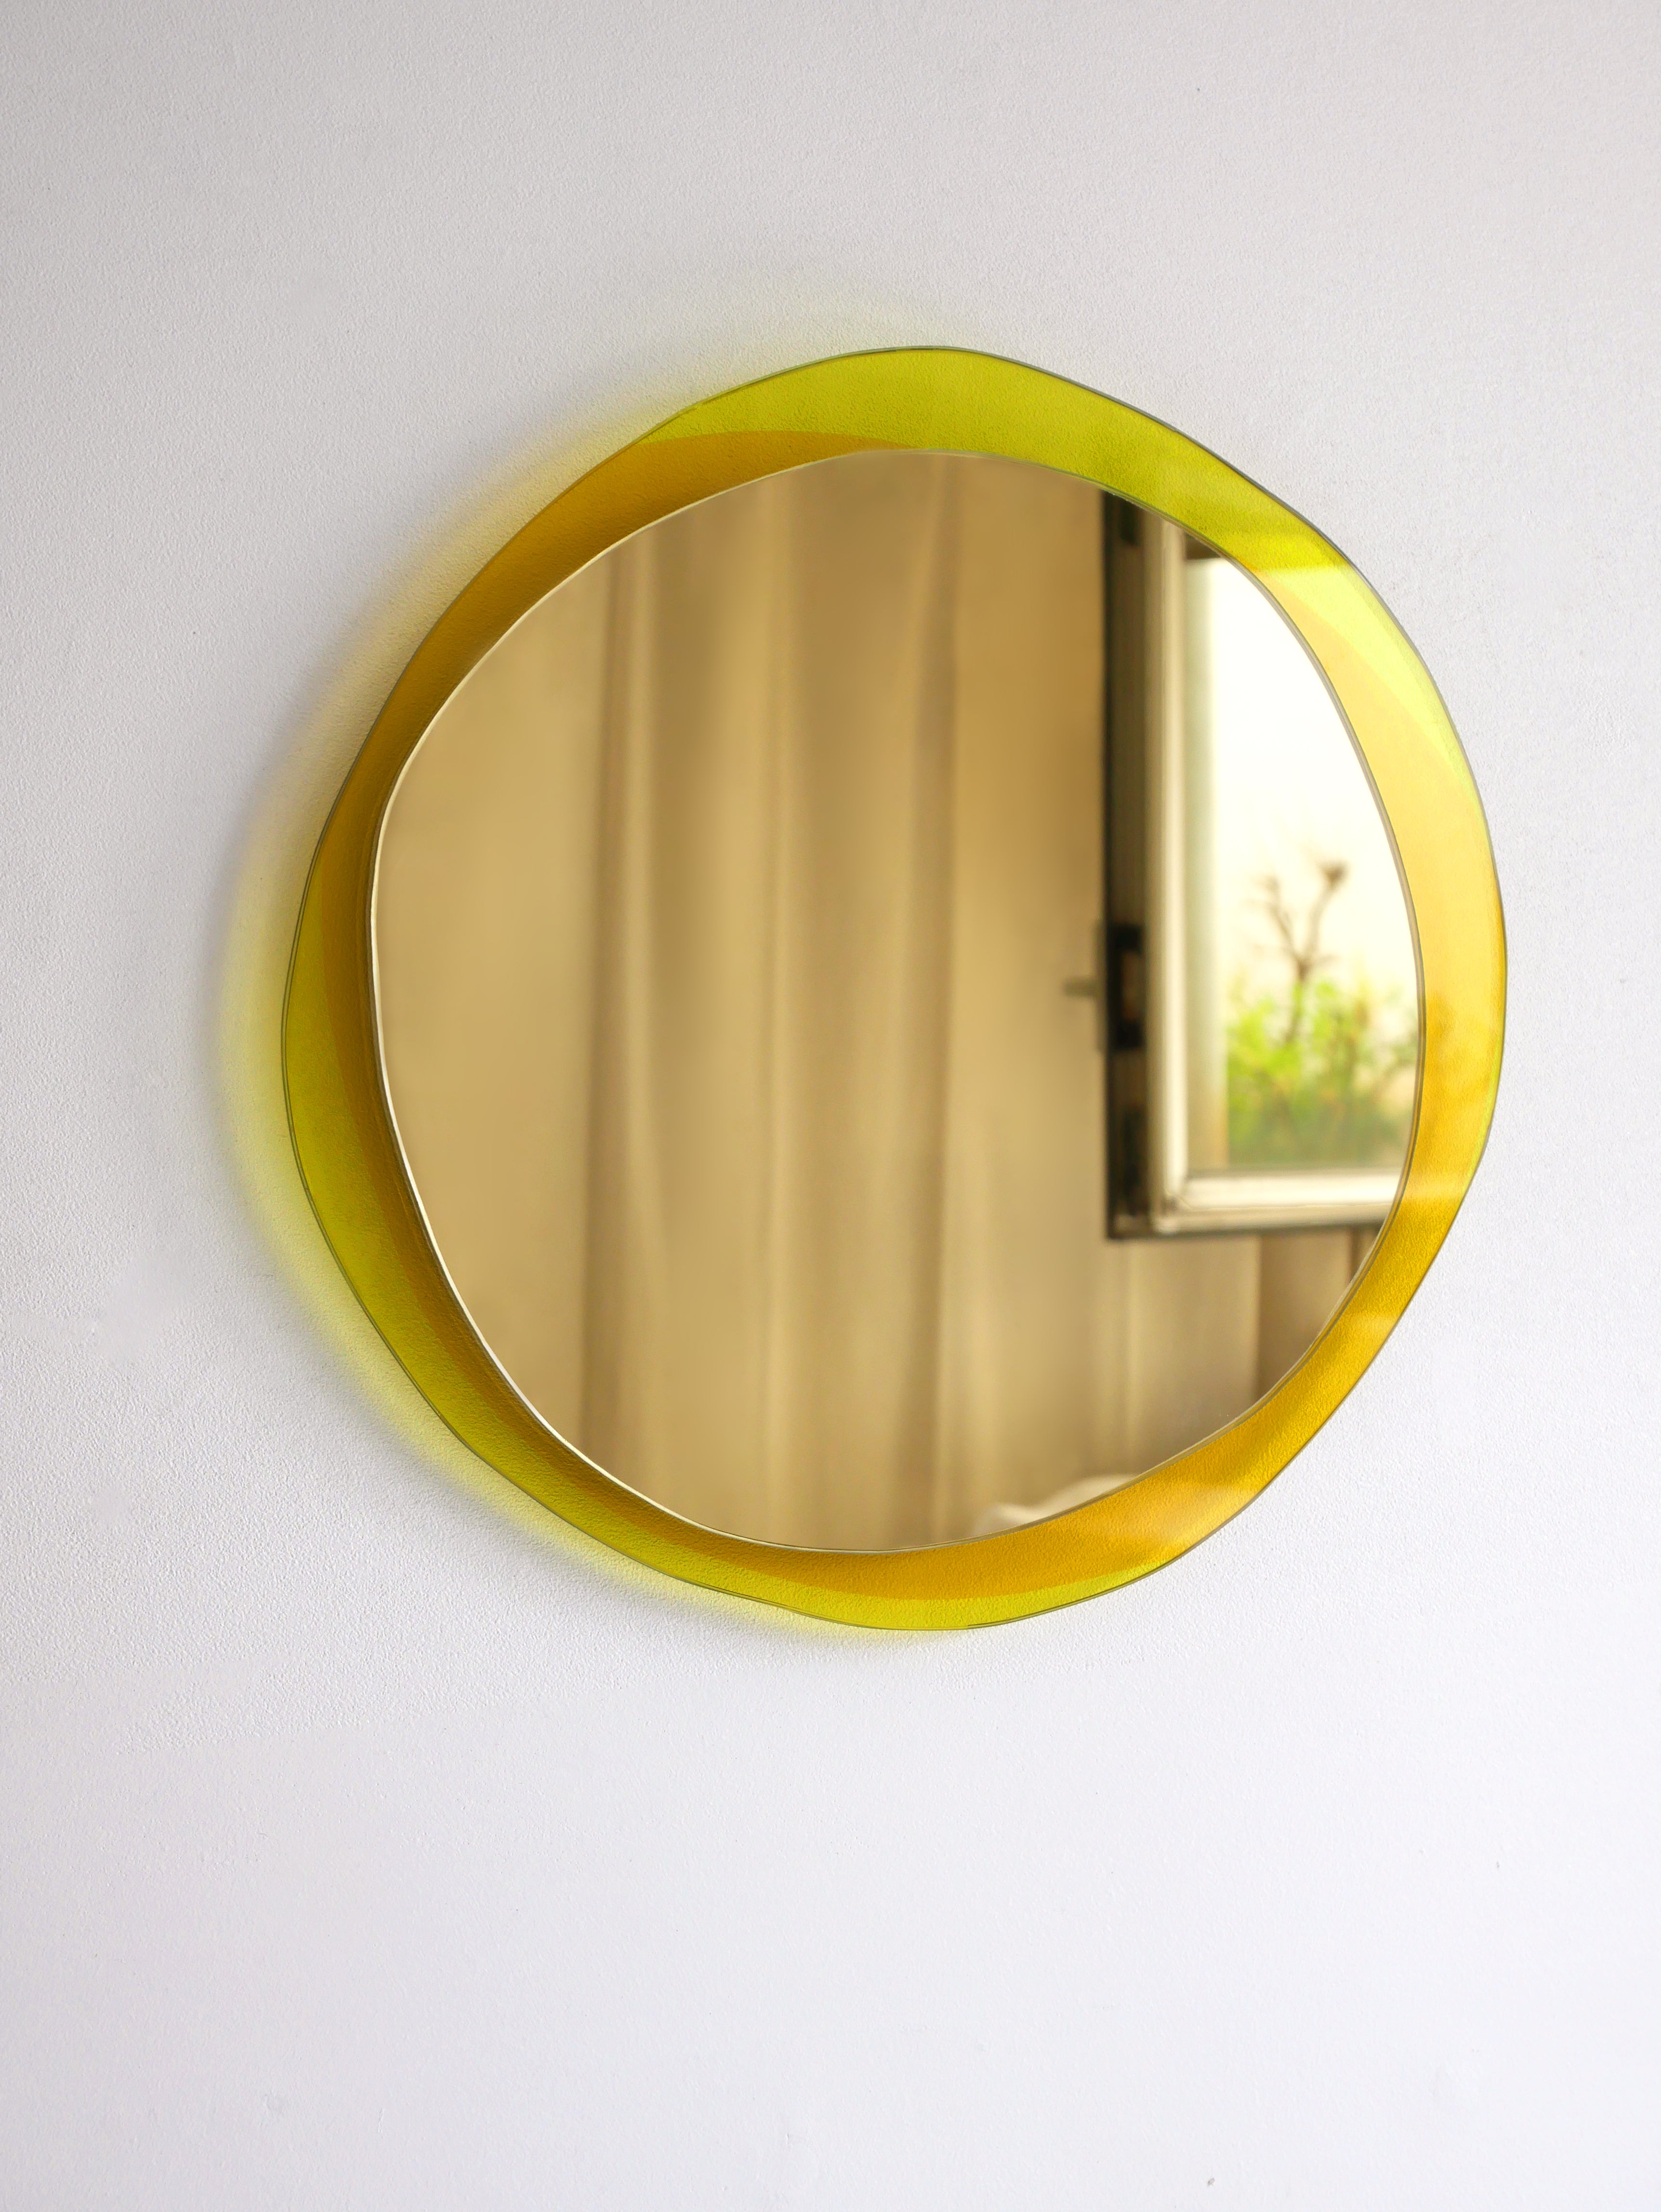 Solar medium hand-sculpted mirror, Laurene Guarneri
Limited edition.
Handmade.
Materials: Gold colored mirror, gold and orange colored laminated glass.
Dimensions: 80 x 80 cm

Laurène Guarneri is a designer based in Paris.
Graduated in